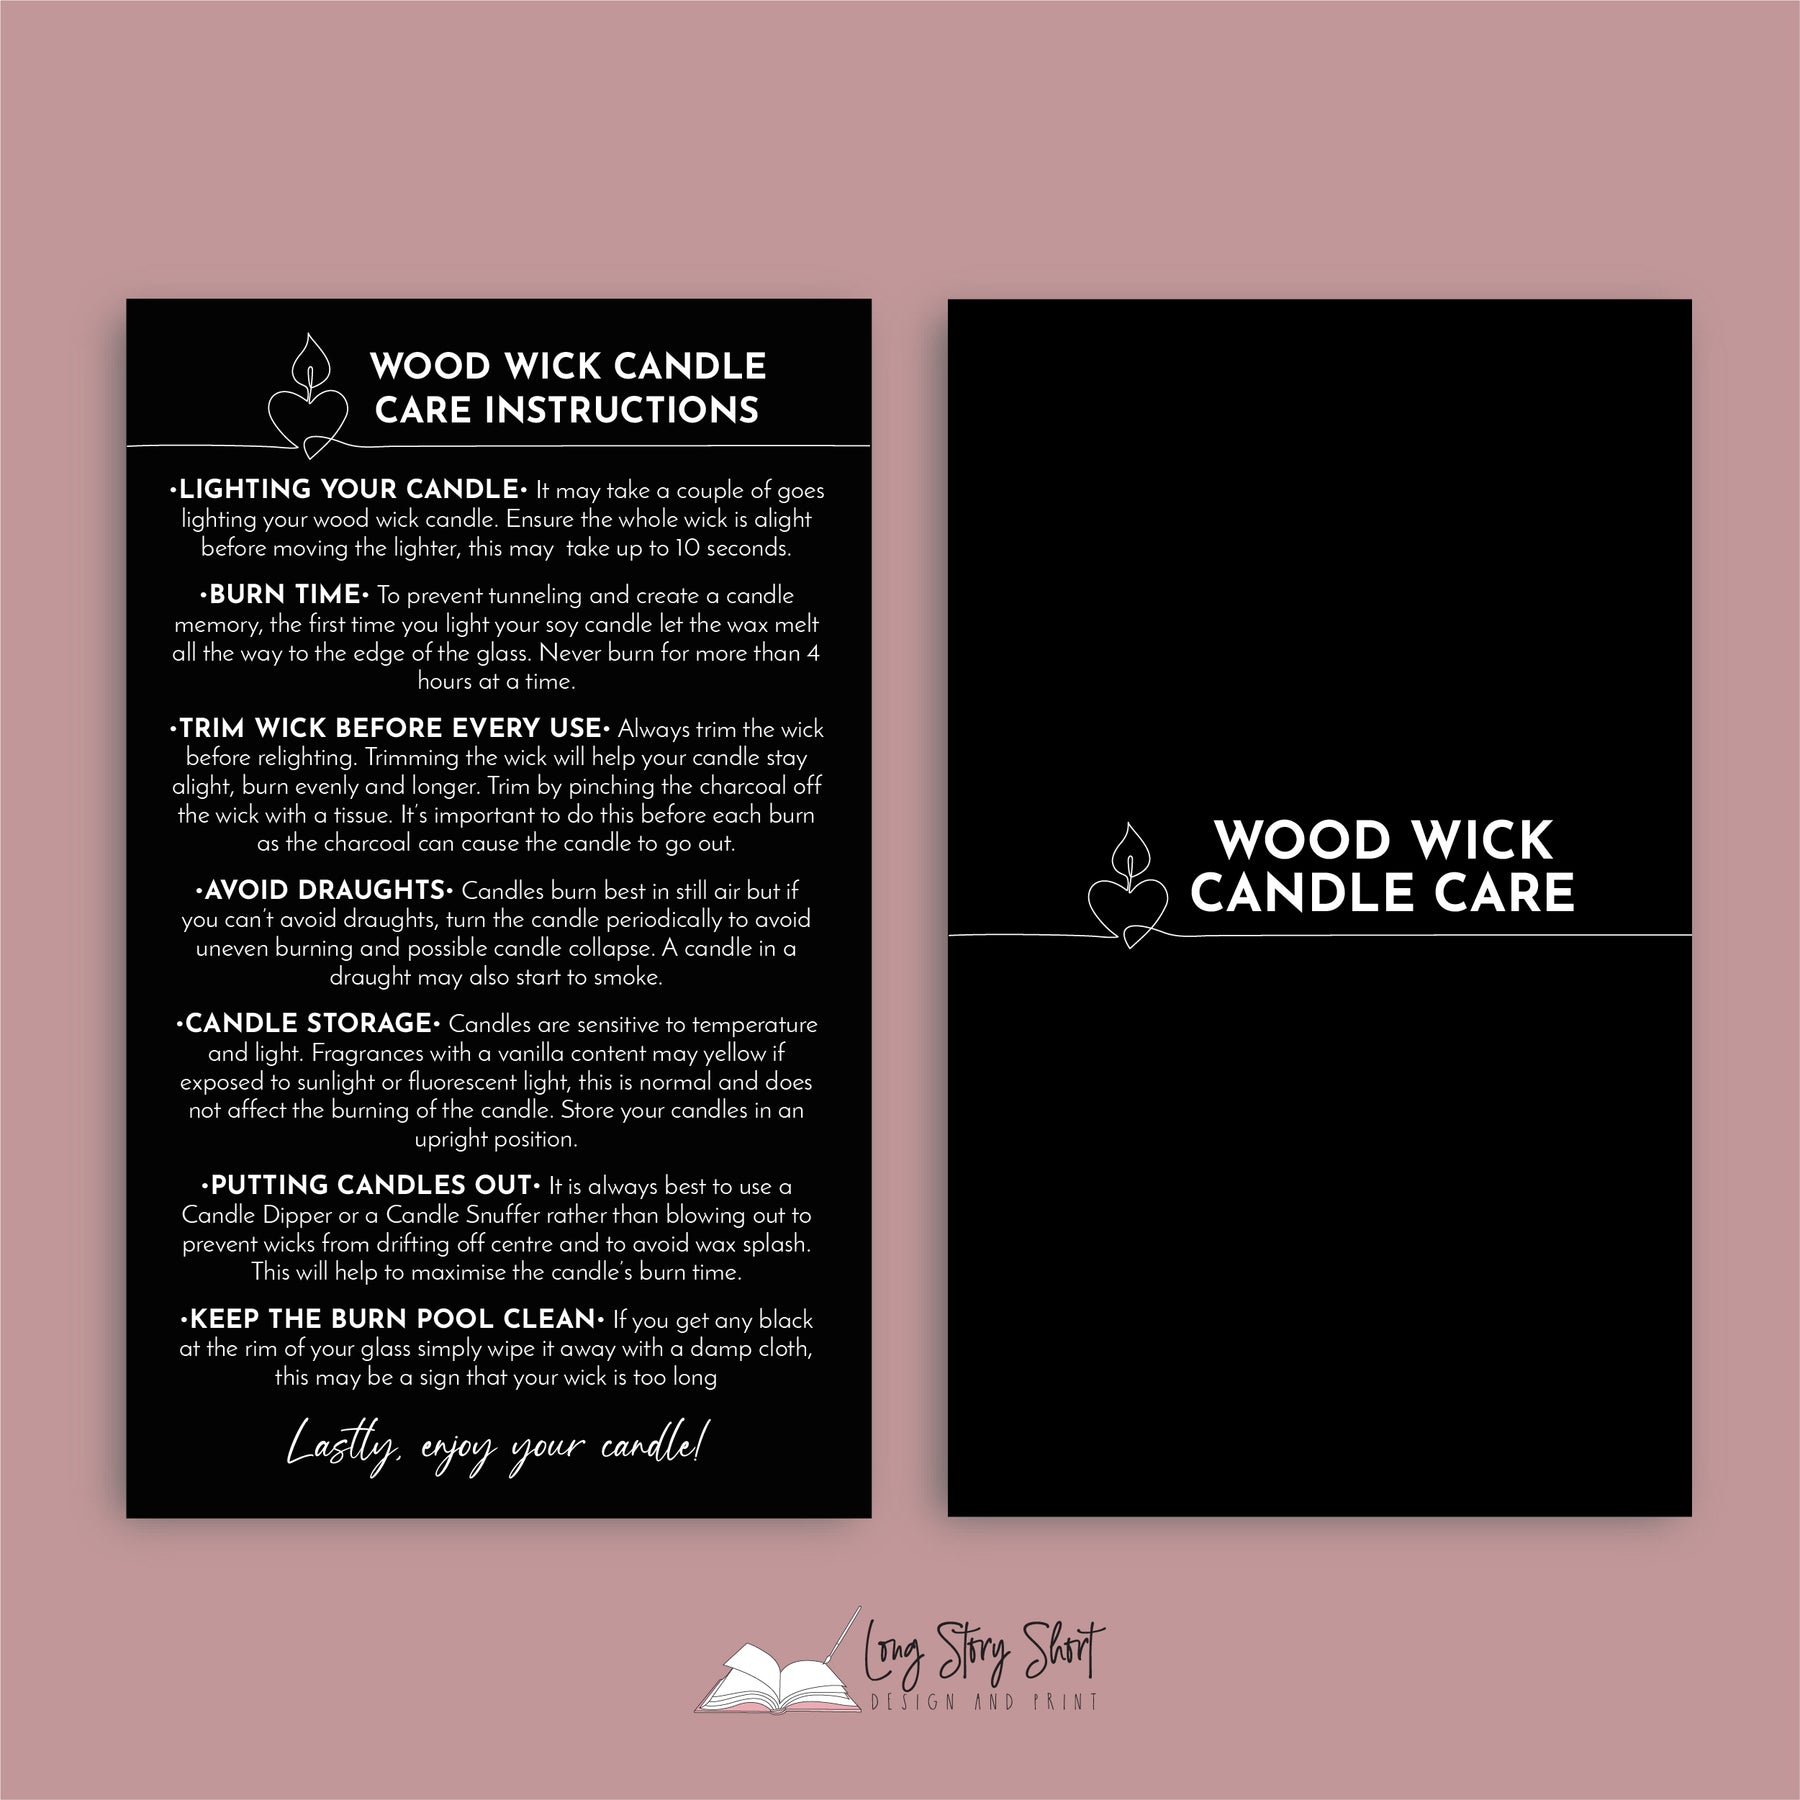 Wooden Wick Candle Care Card Template, Editable Candle Warning Guide,  Minimalist Woodenwick Candle Safety Instructions, Printable, M-002 